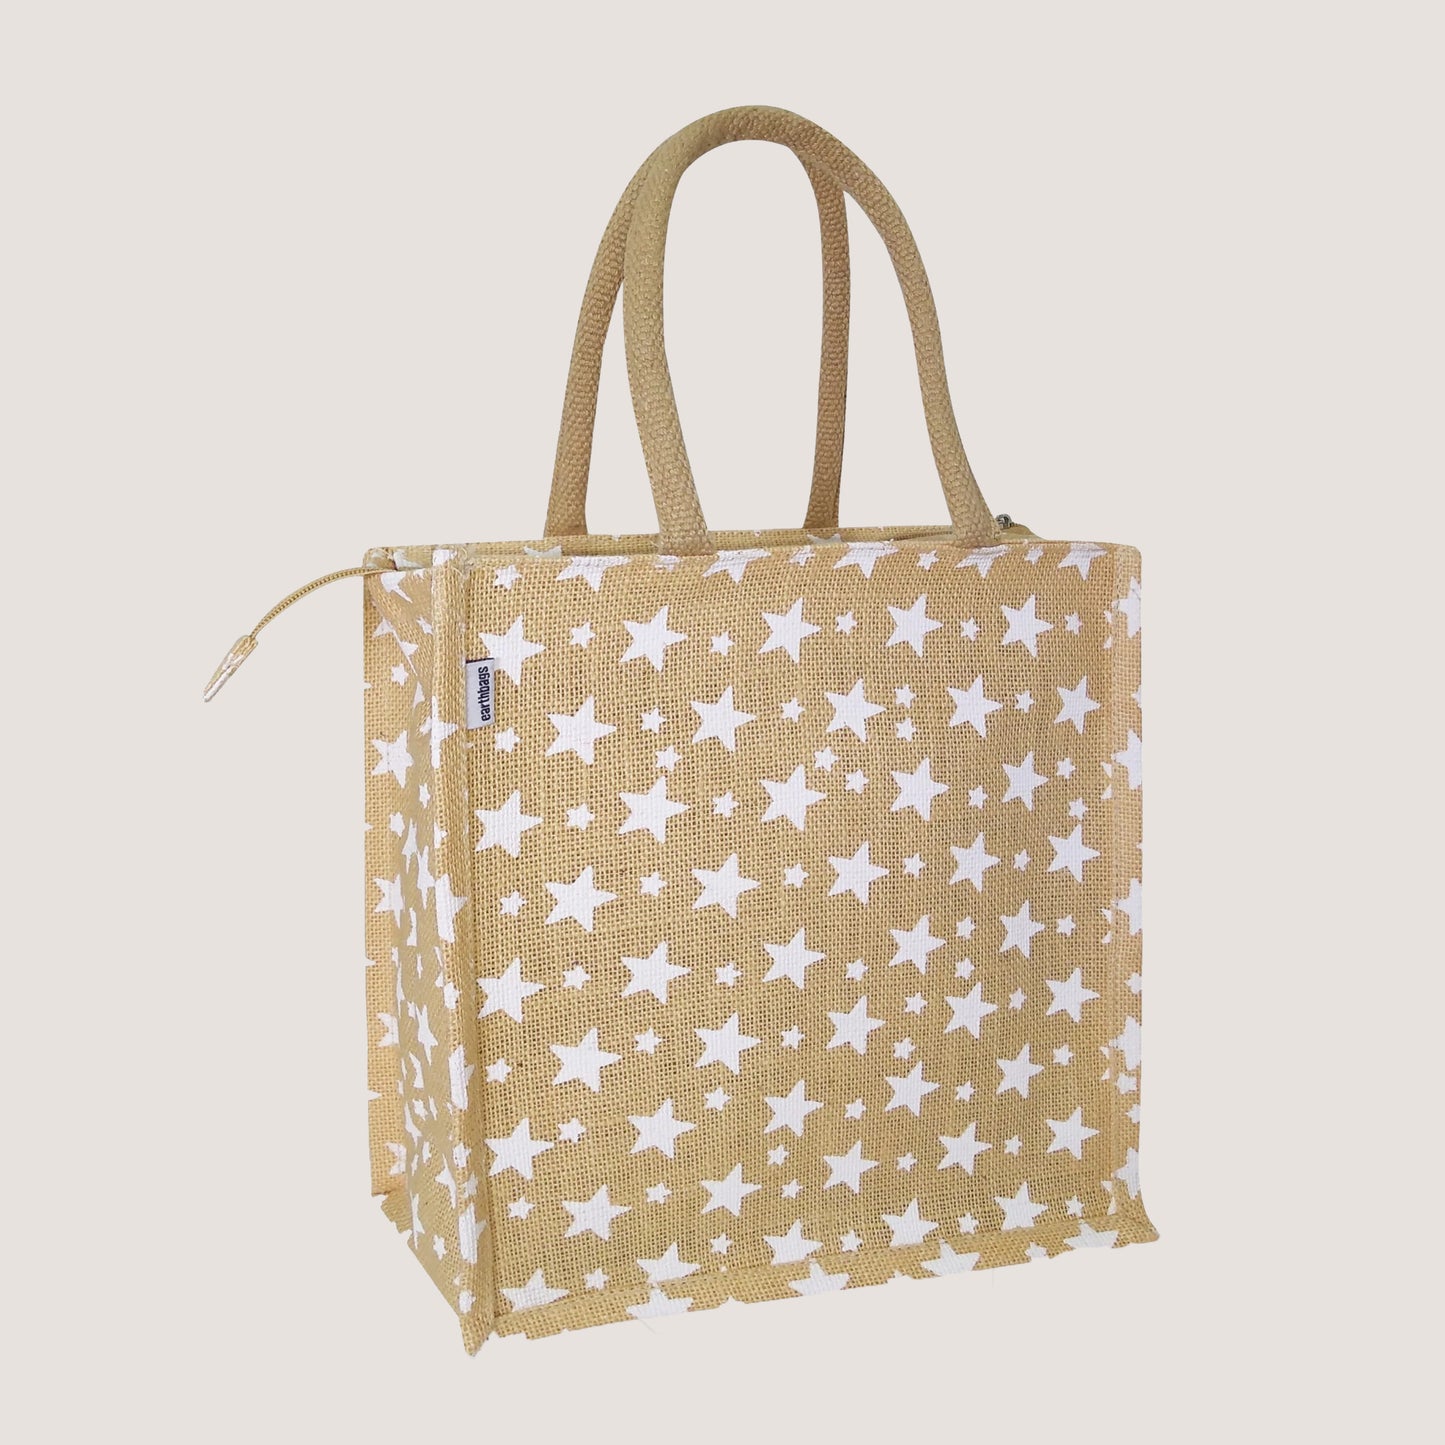 EARTHBAGS STAR PRINTED JUTE LUNCH BAG WITH ZIPPER